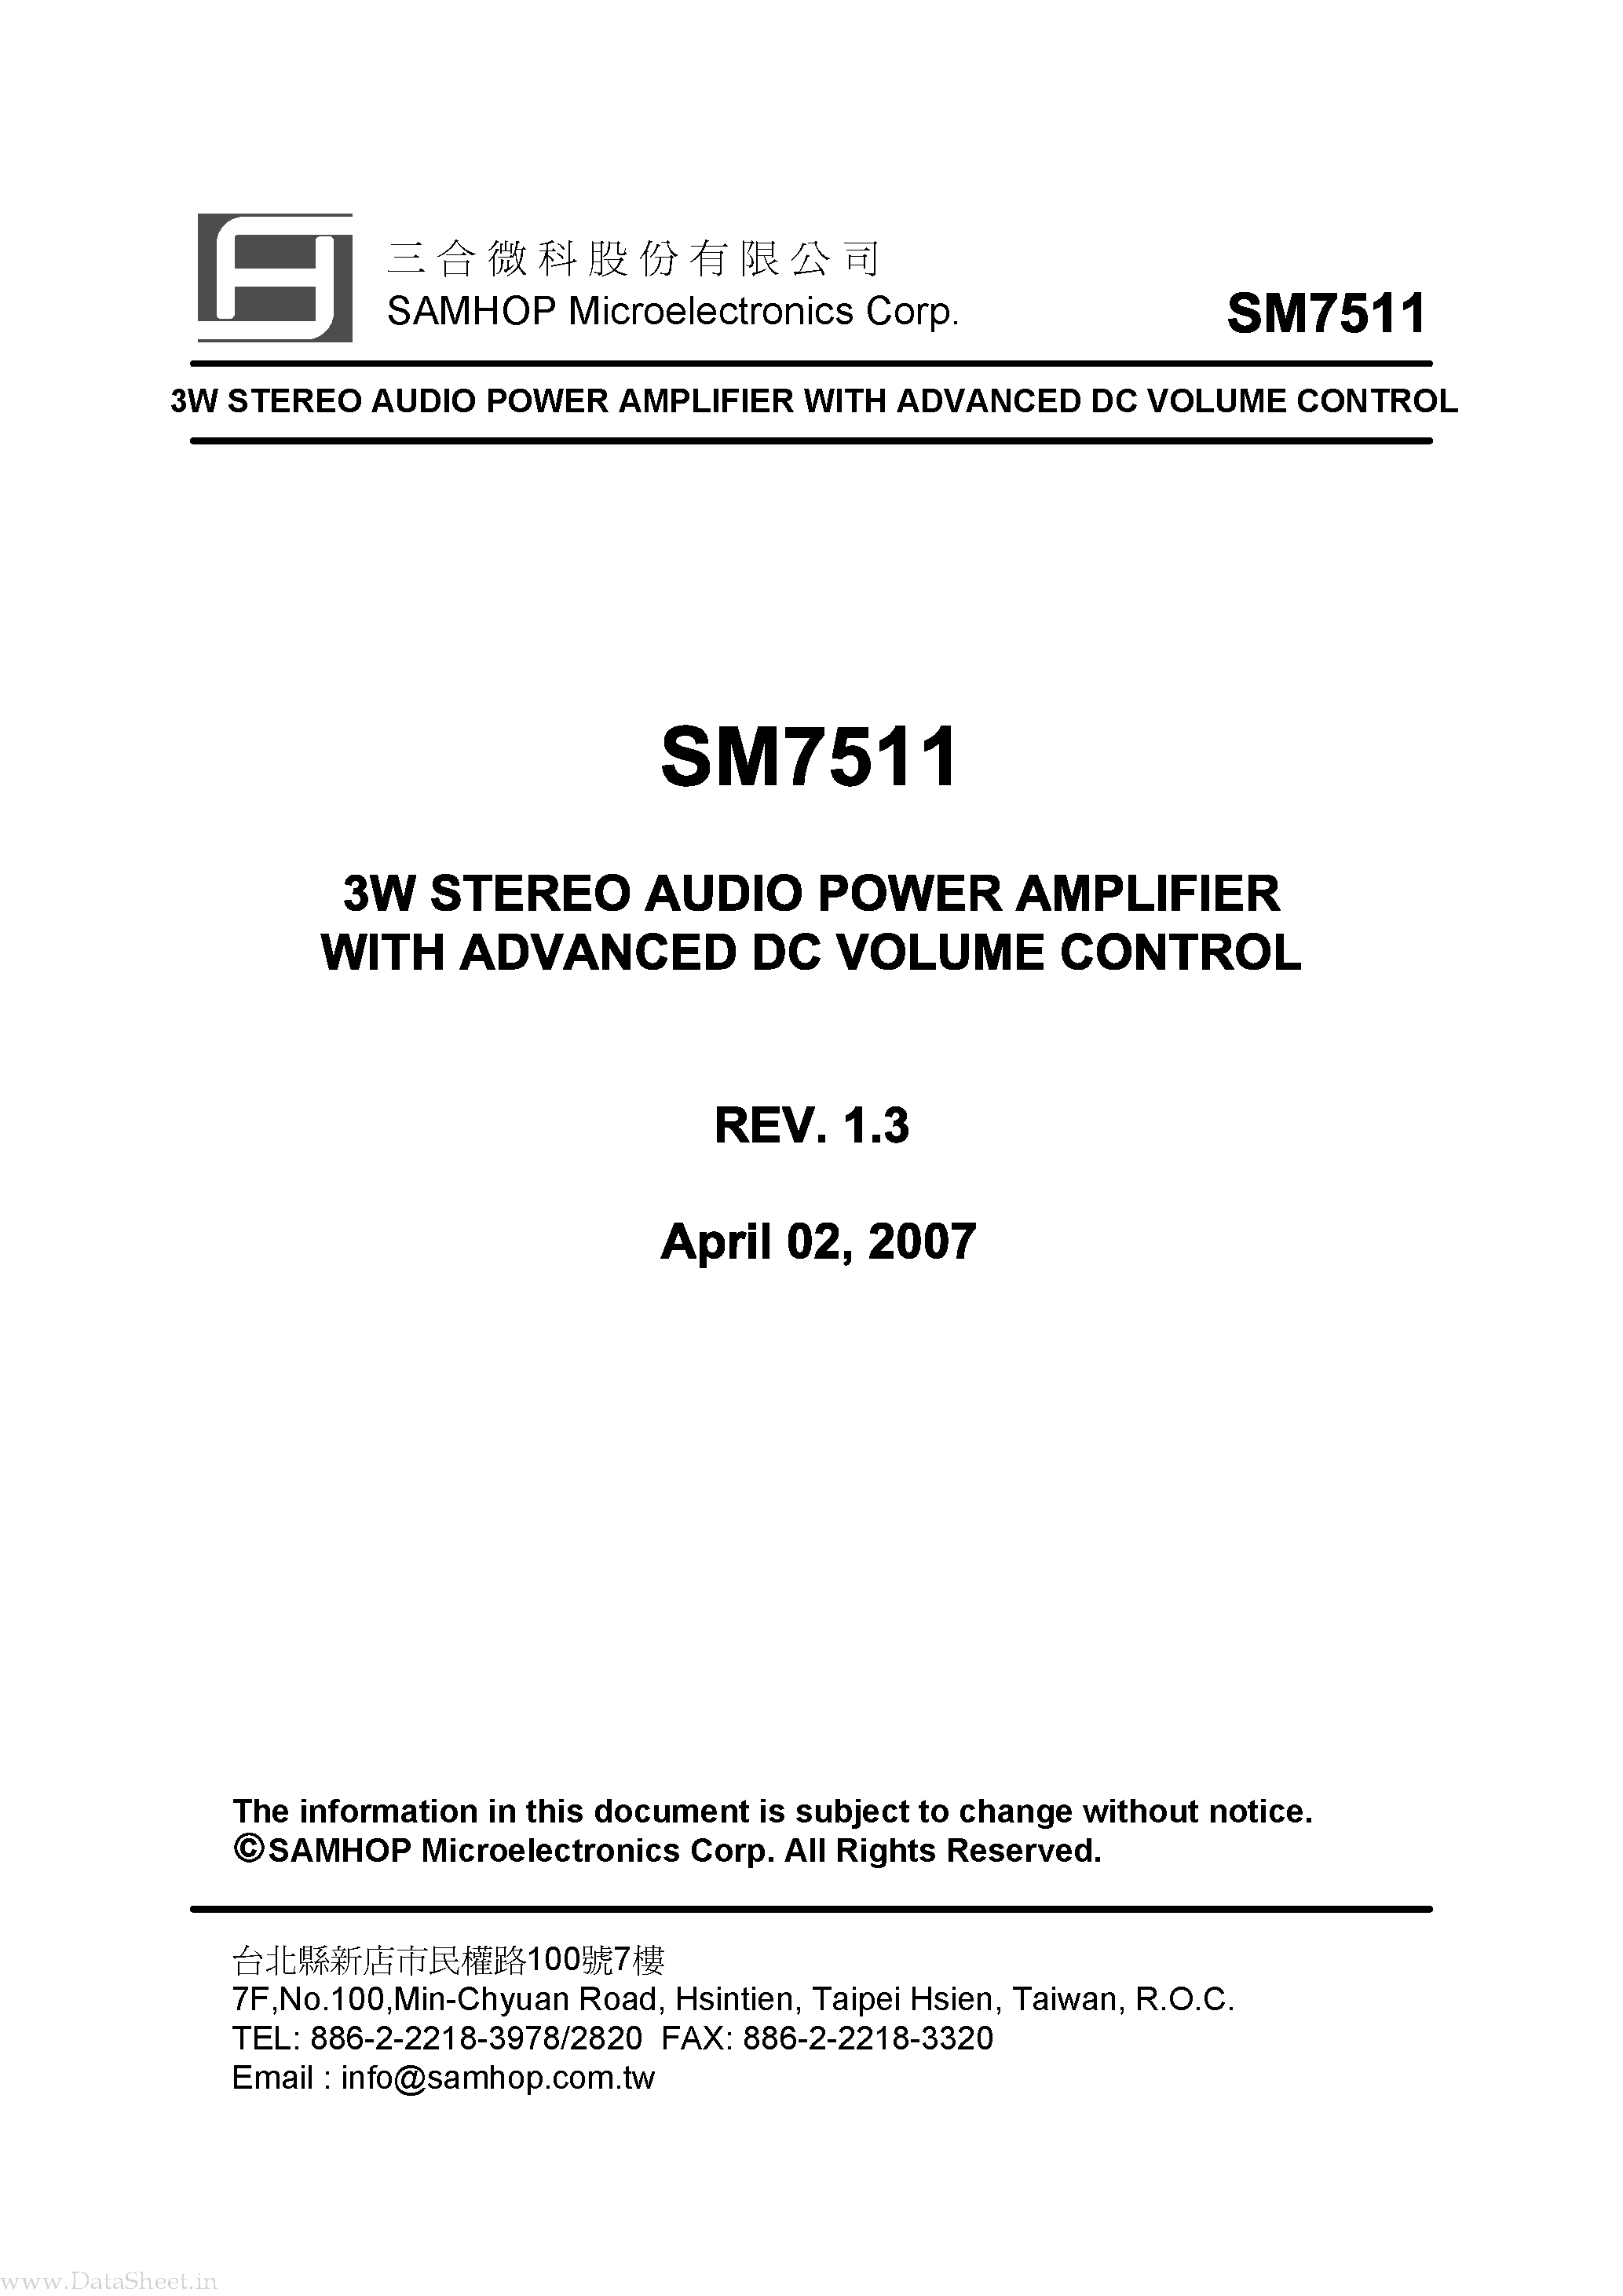 Datasheet SM7511 - 3W STEREO AUDIO POWER AMPLIFIER page 1